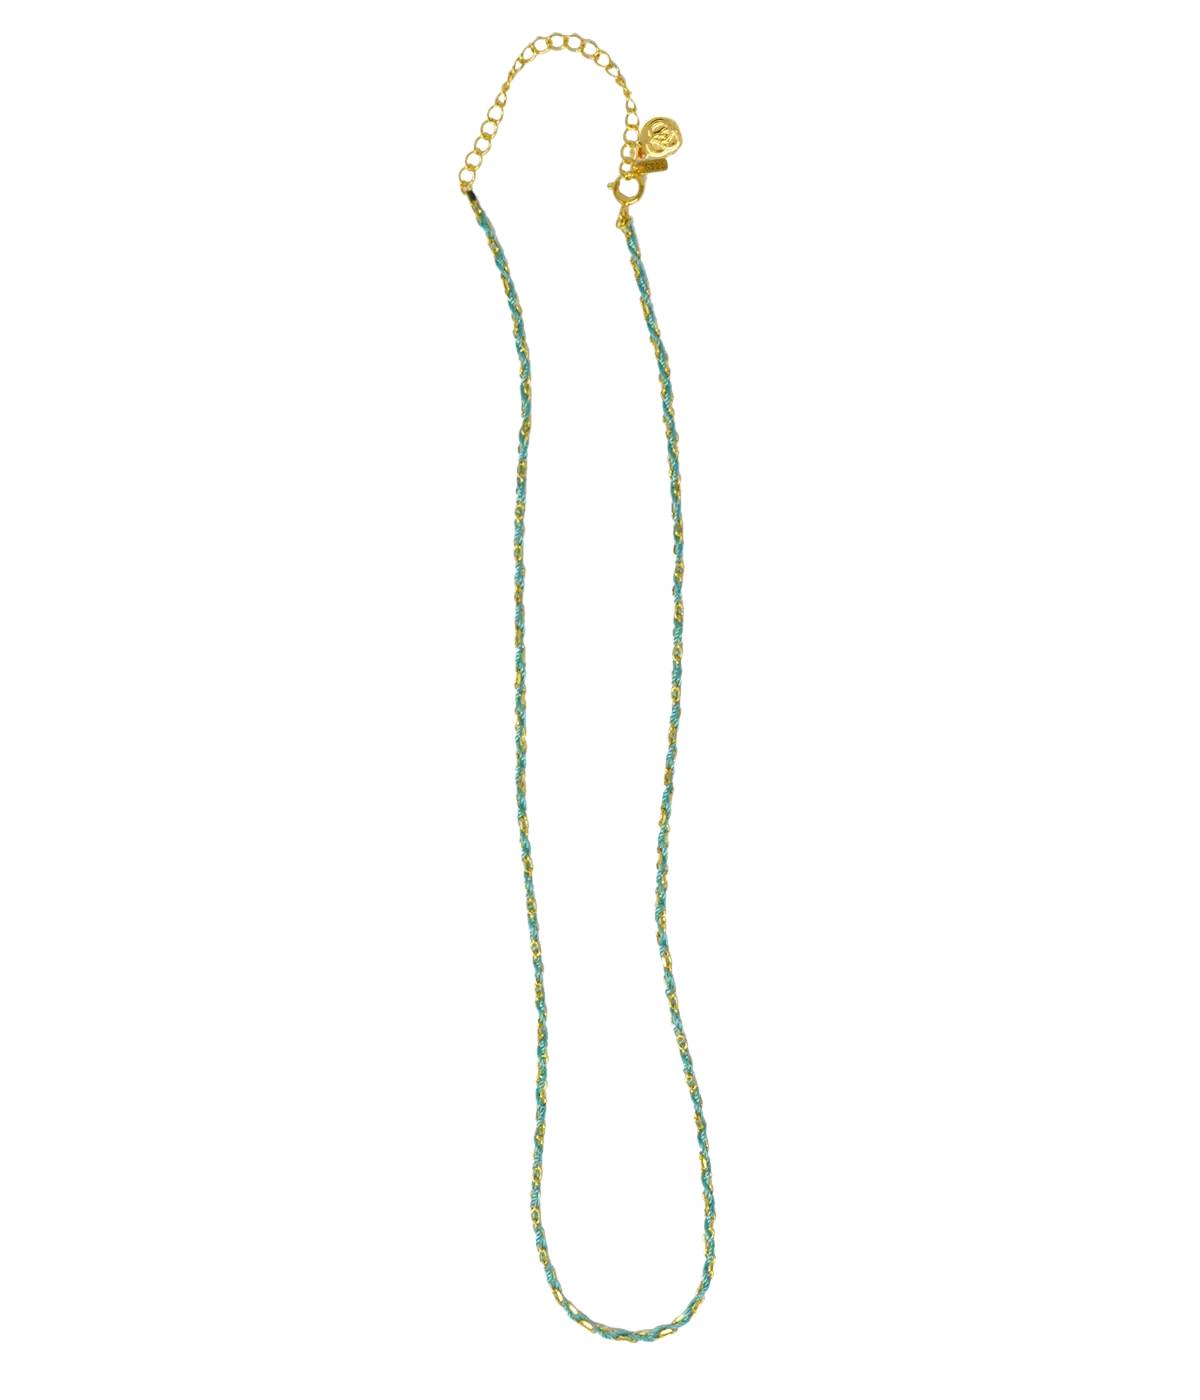 Rook Necklace in 14K Yellow Gold & Teal